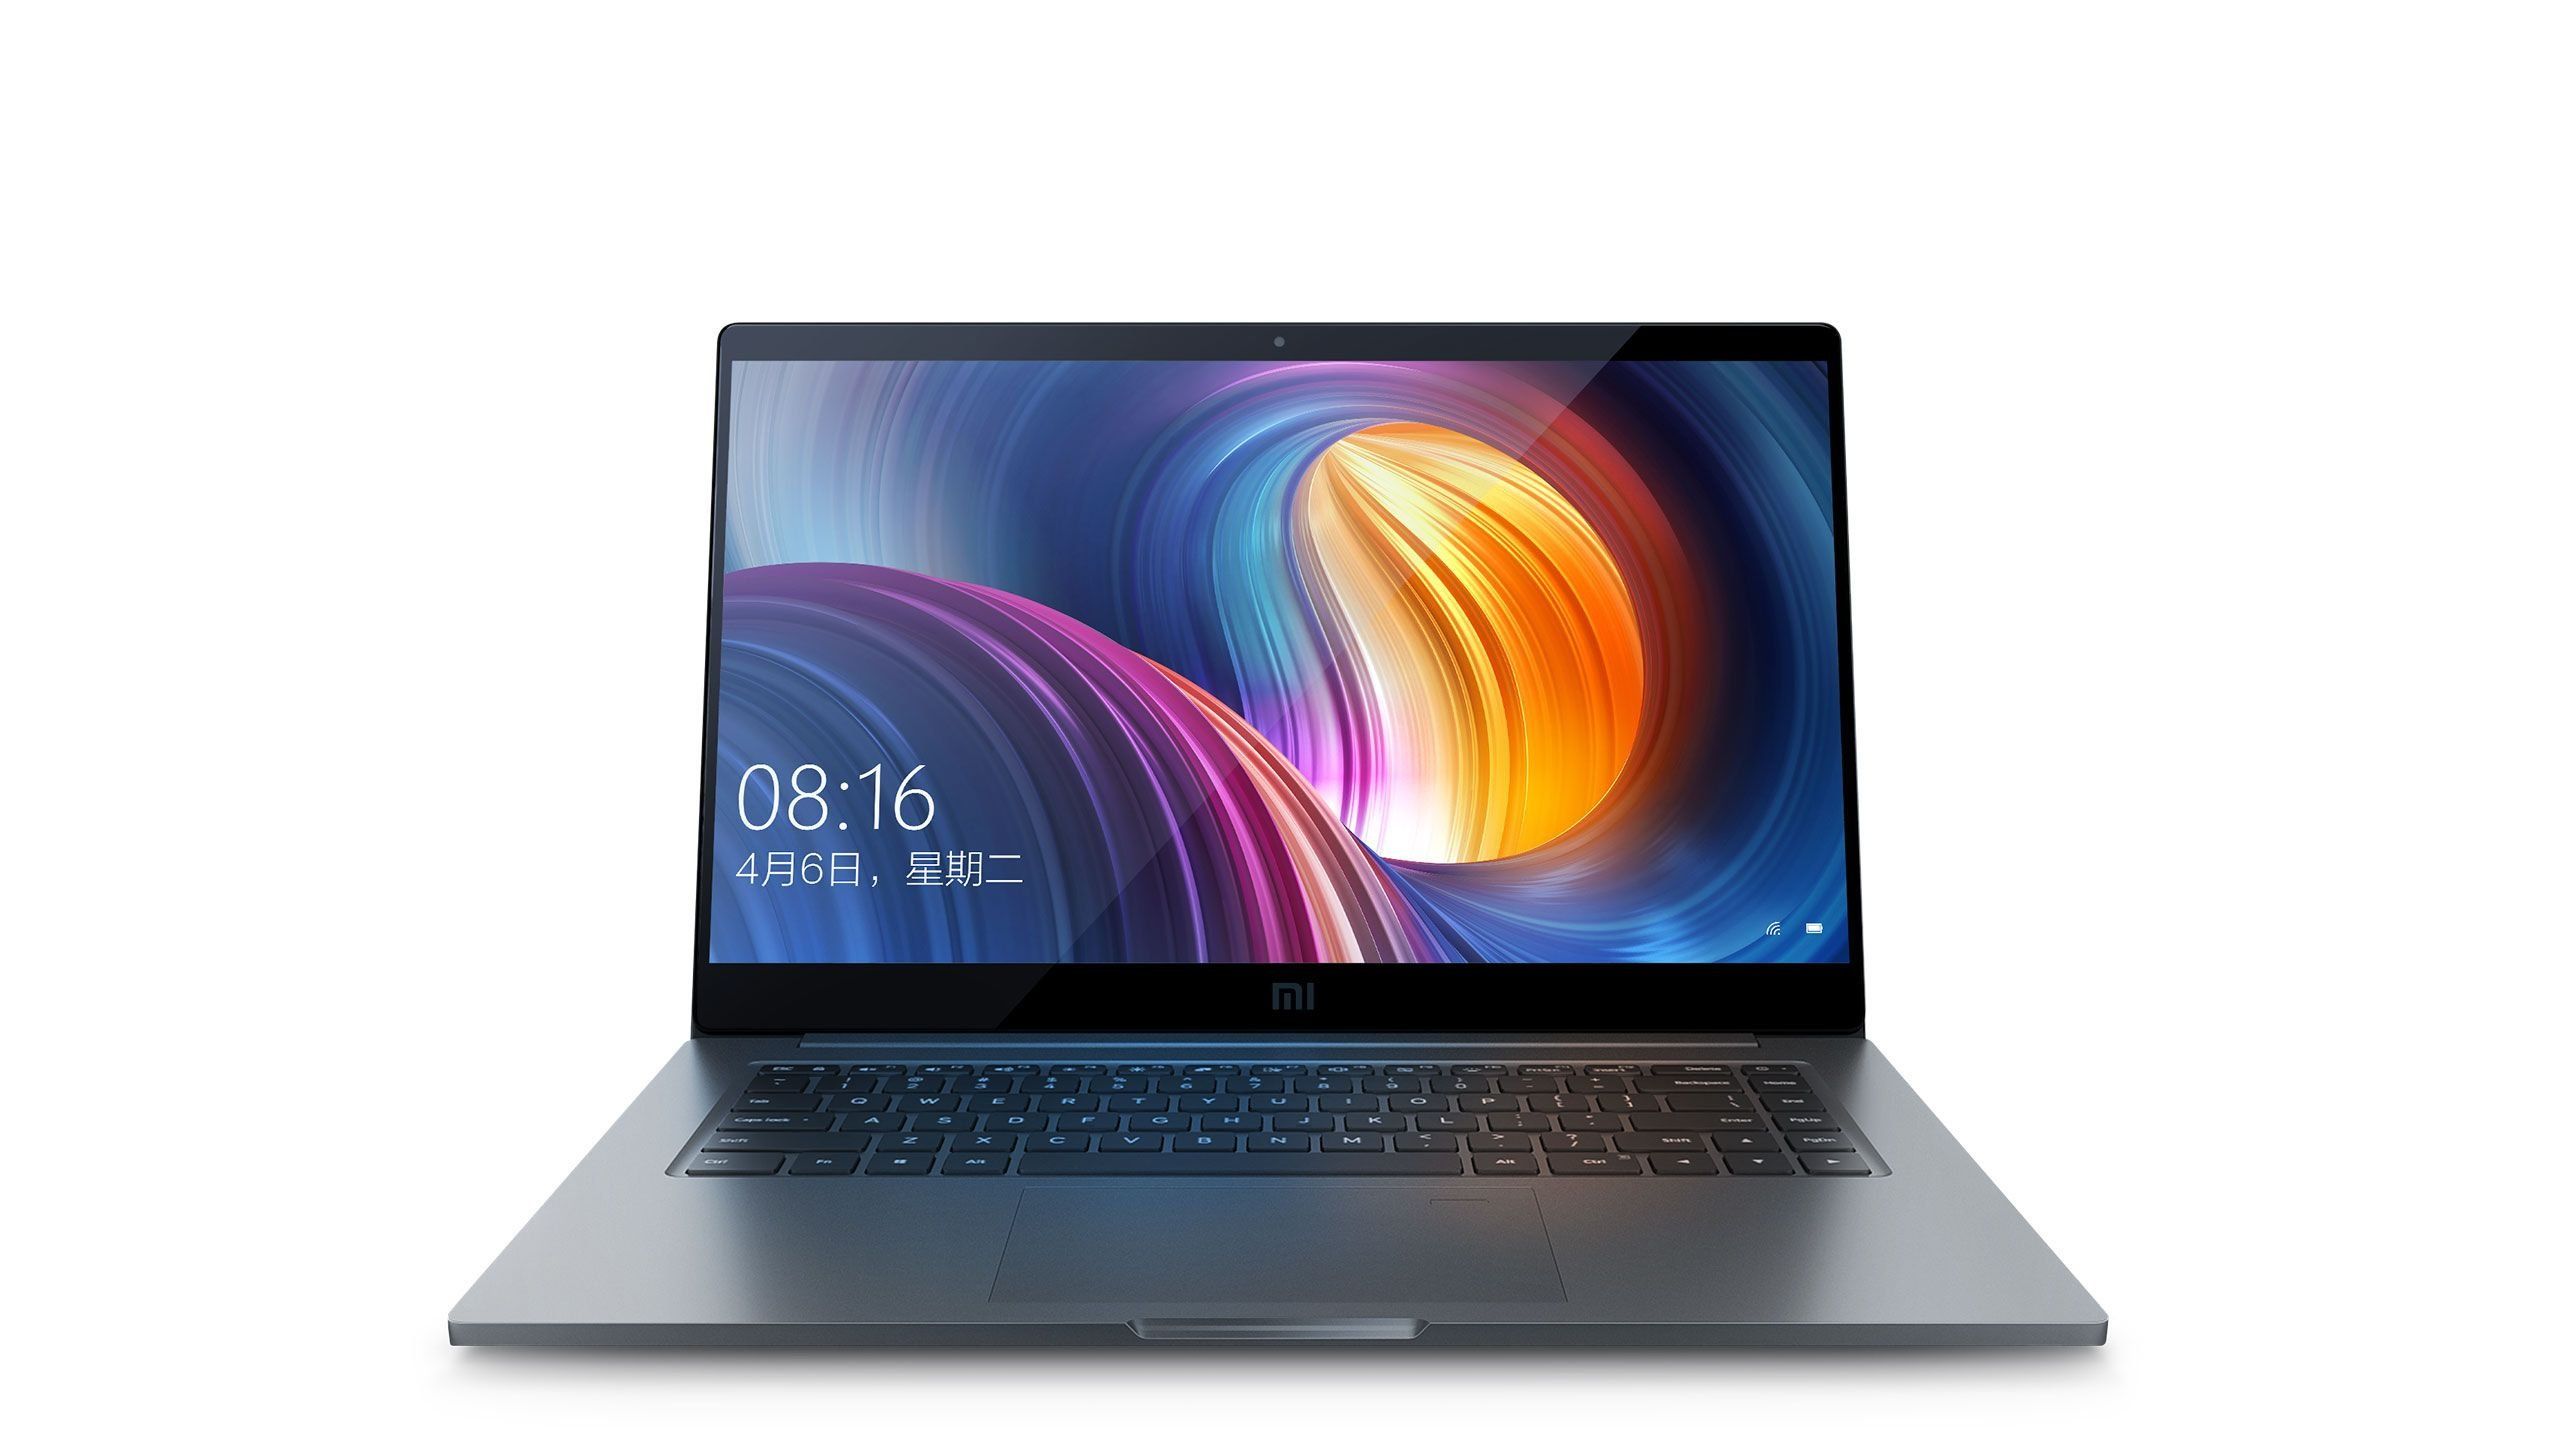 Review of the Xiaomi Mi Notebook Pro 15.6 GTX laptop: advantages and disadvantages